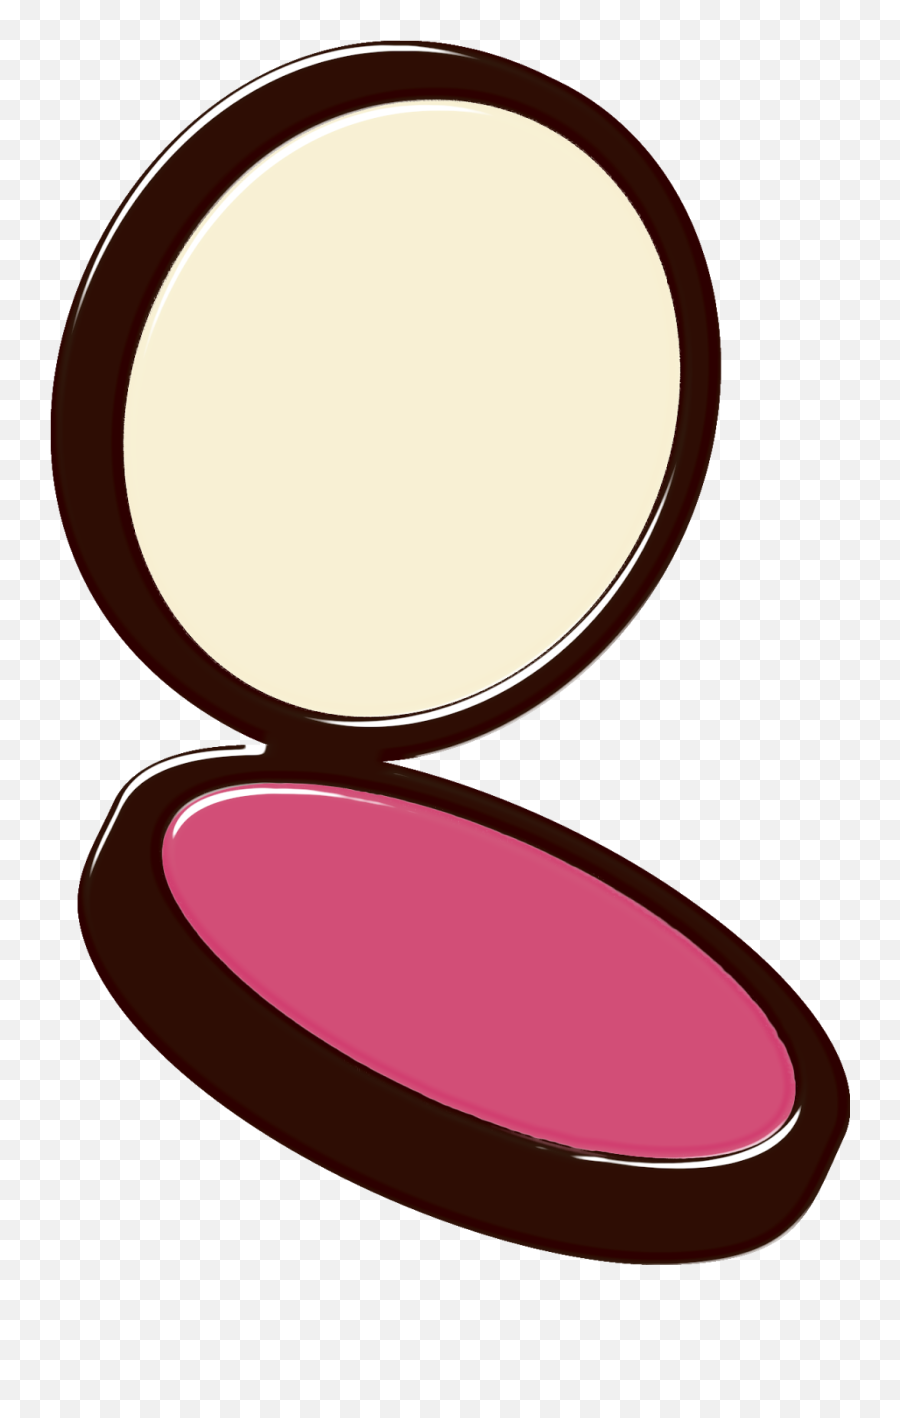 Image Result For Free Images And Illustrations And Clipart - Makeup Emoji Png,Makeup Clipart